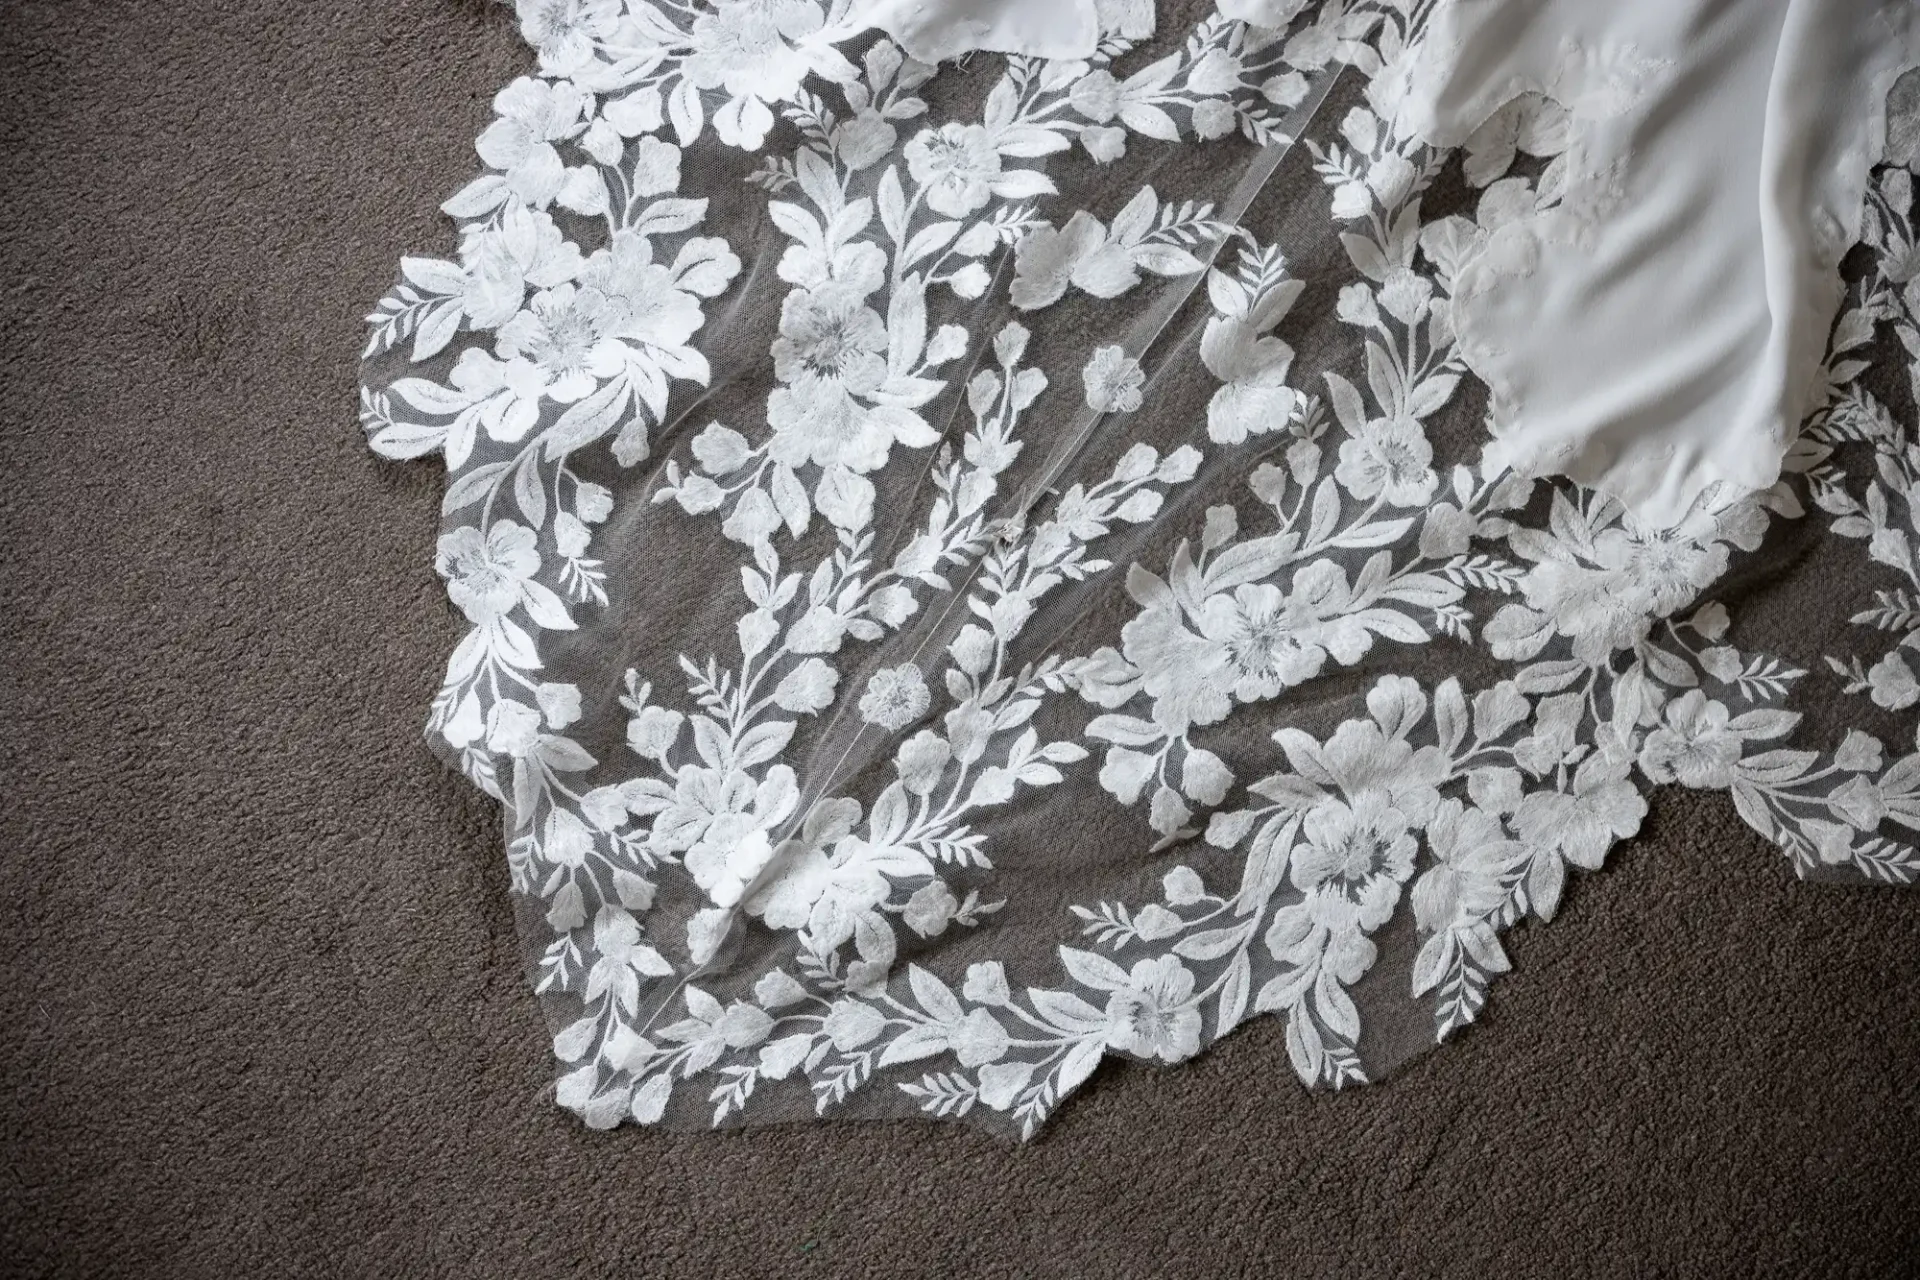 Close-up of white lace floral embroidery on a sheer fabric, laid over a grey carpet.